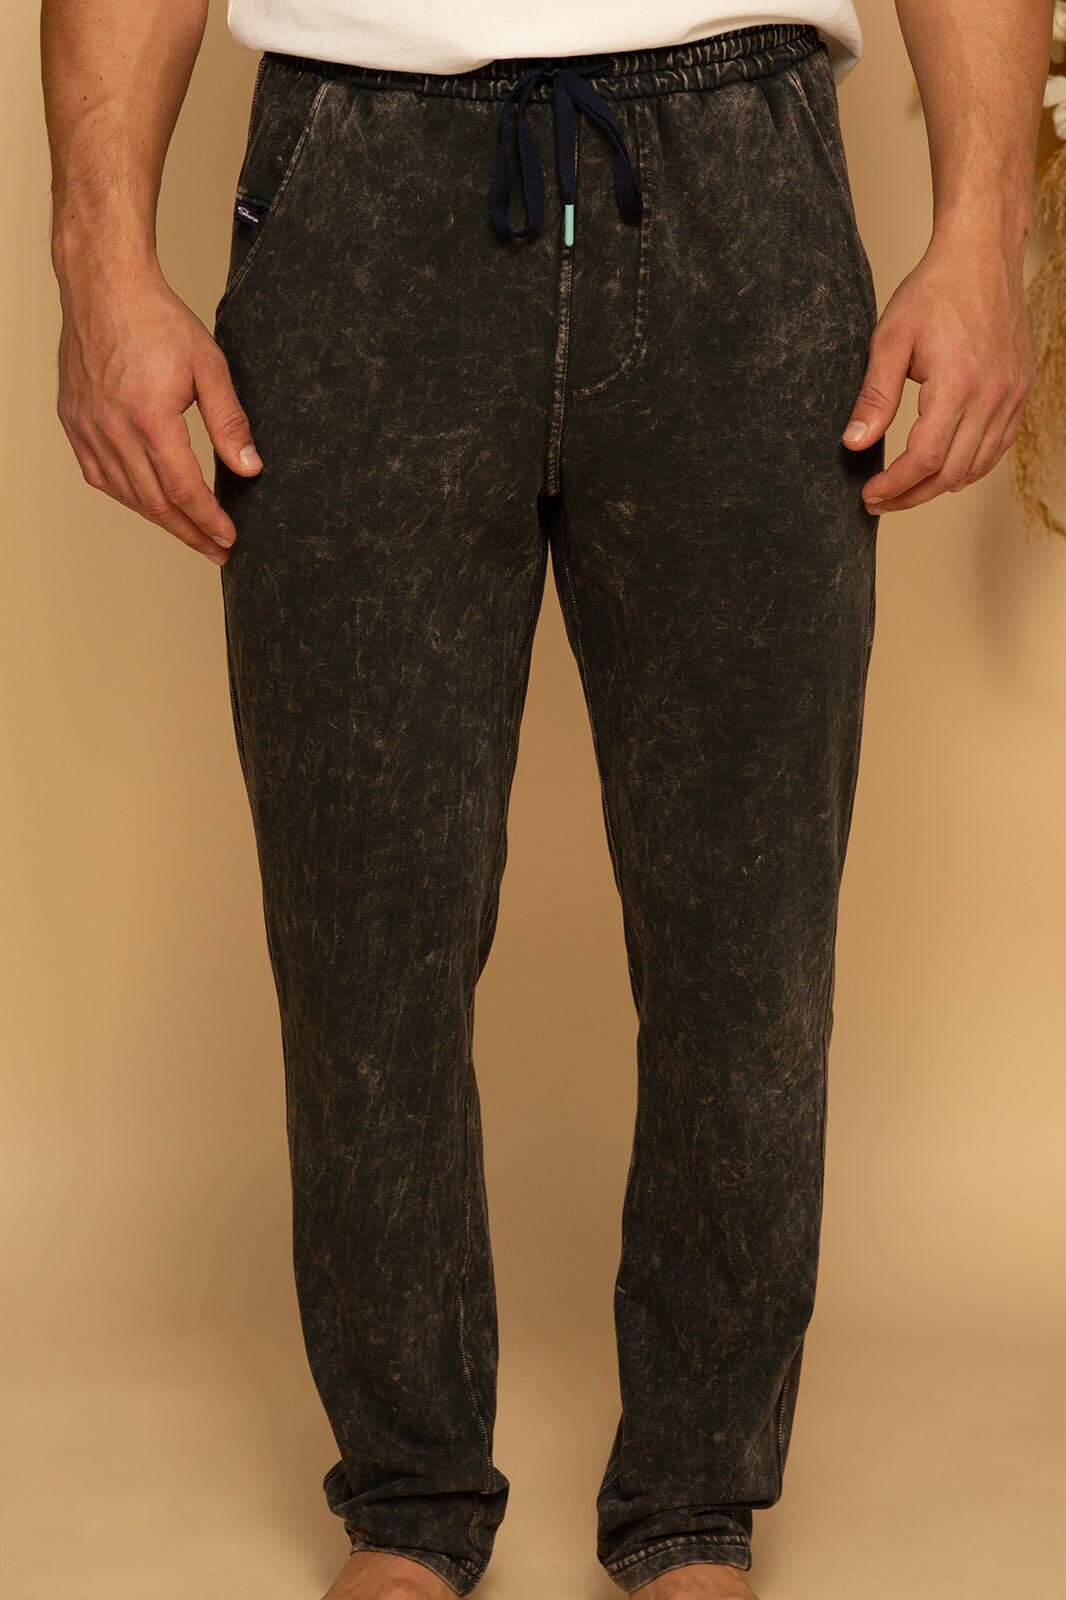 Tall Men's Lounge Pant Joggers in Black